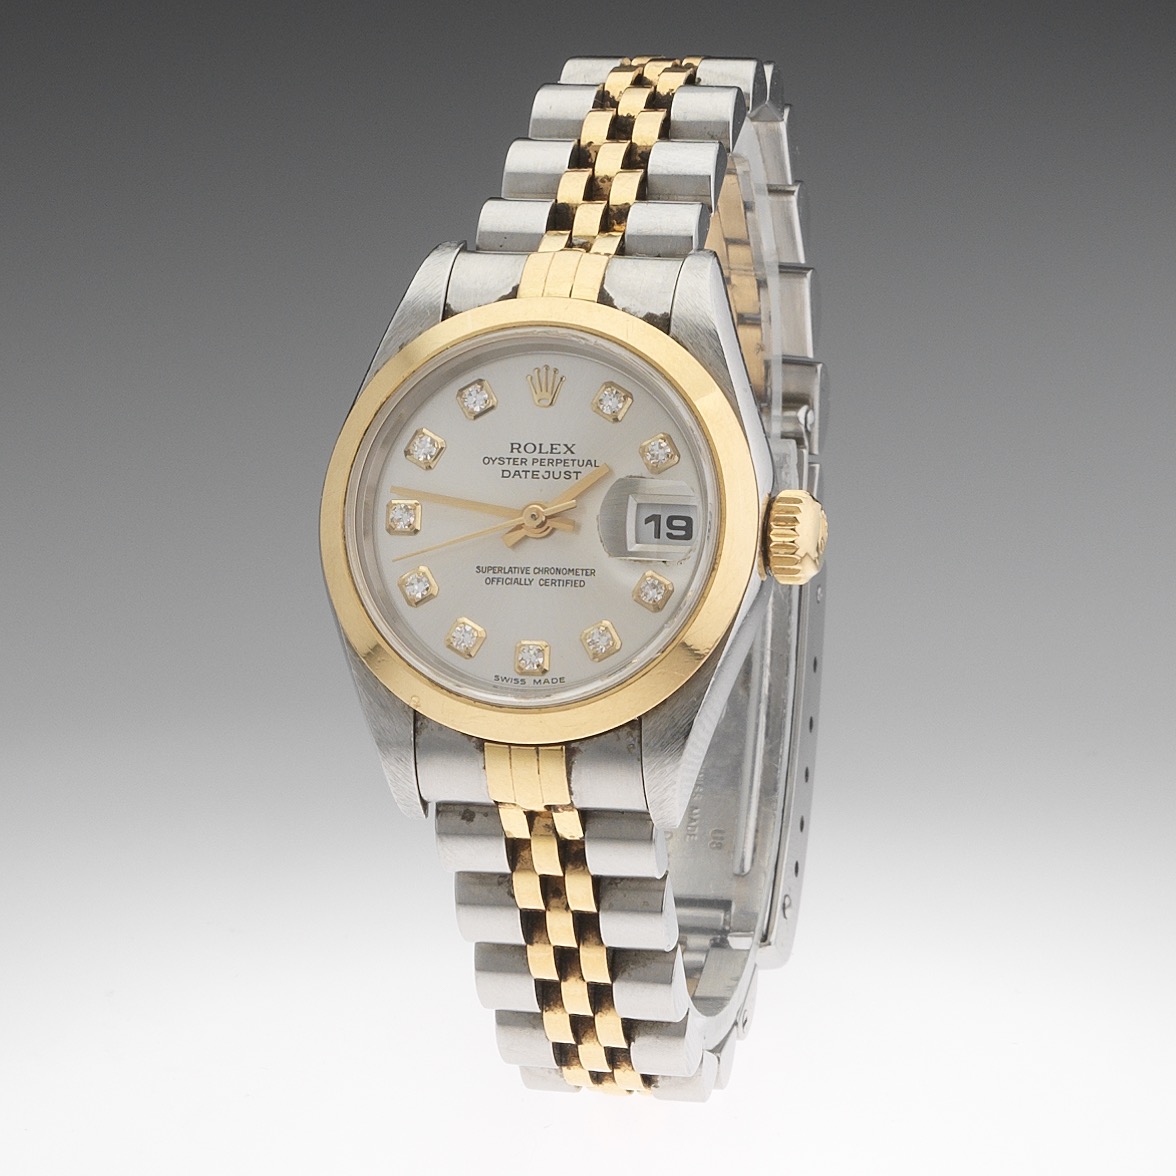 rolex oyster perpetual datejust superlative chronometer officially certified swiss made